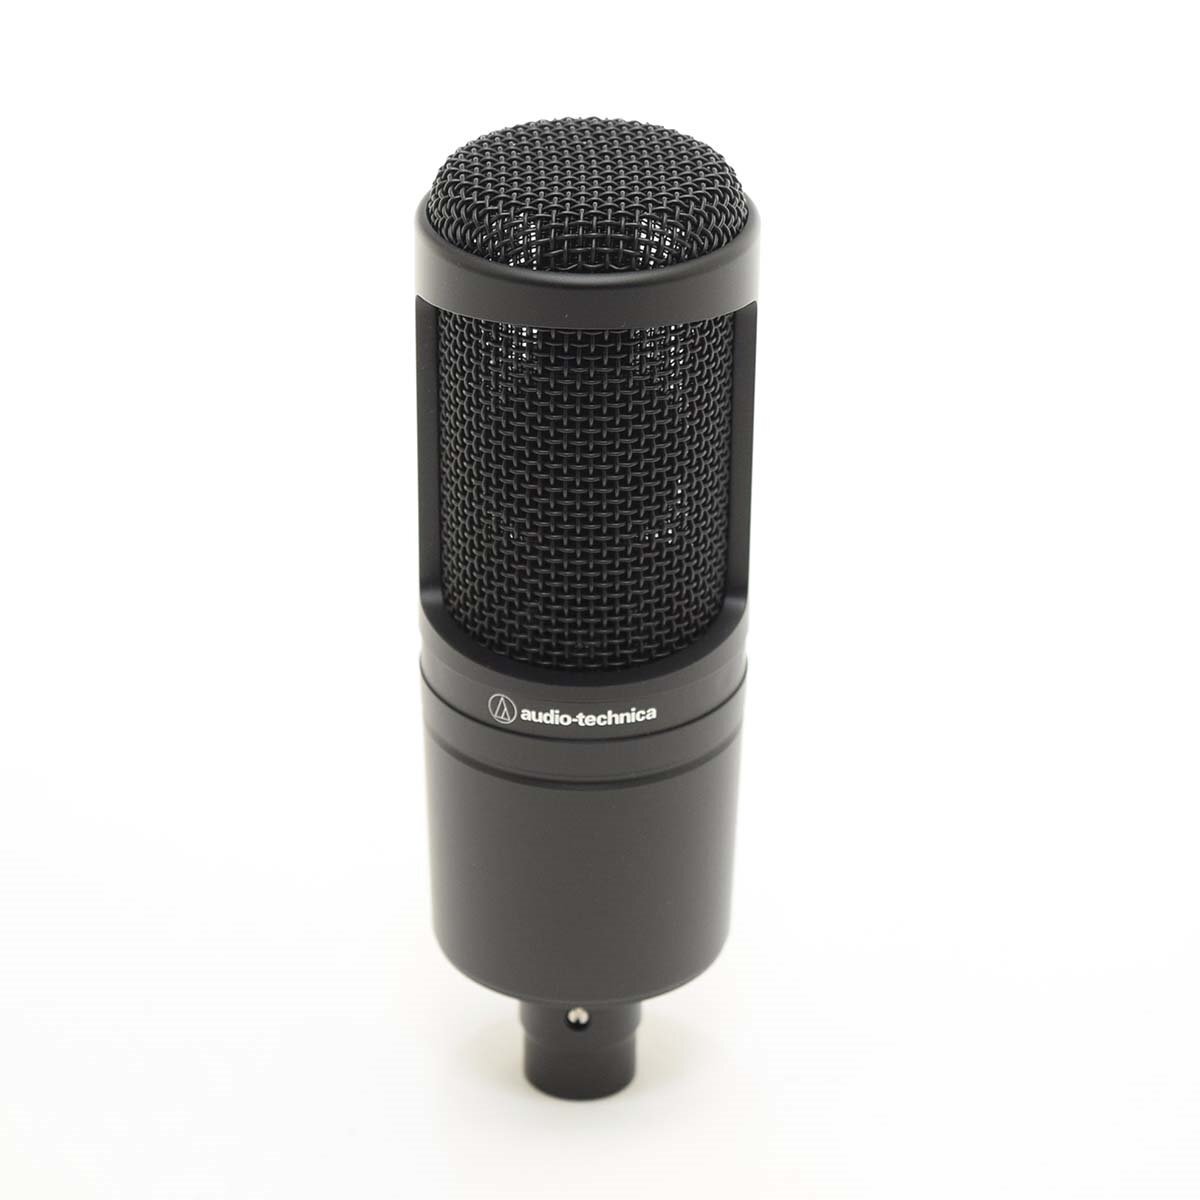 v511539 [ beautiful goods ]Audio-technica condenser microphone AT2020 operation verification settled accessory equipped Audio Technica 